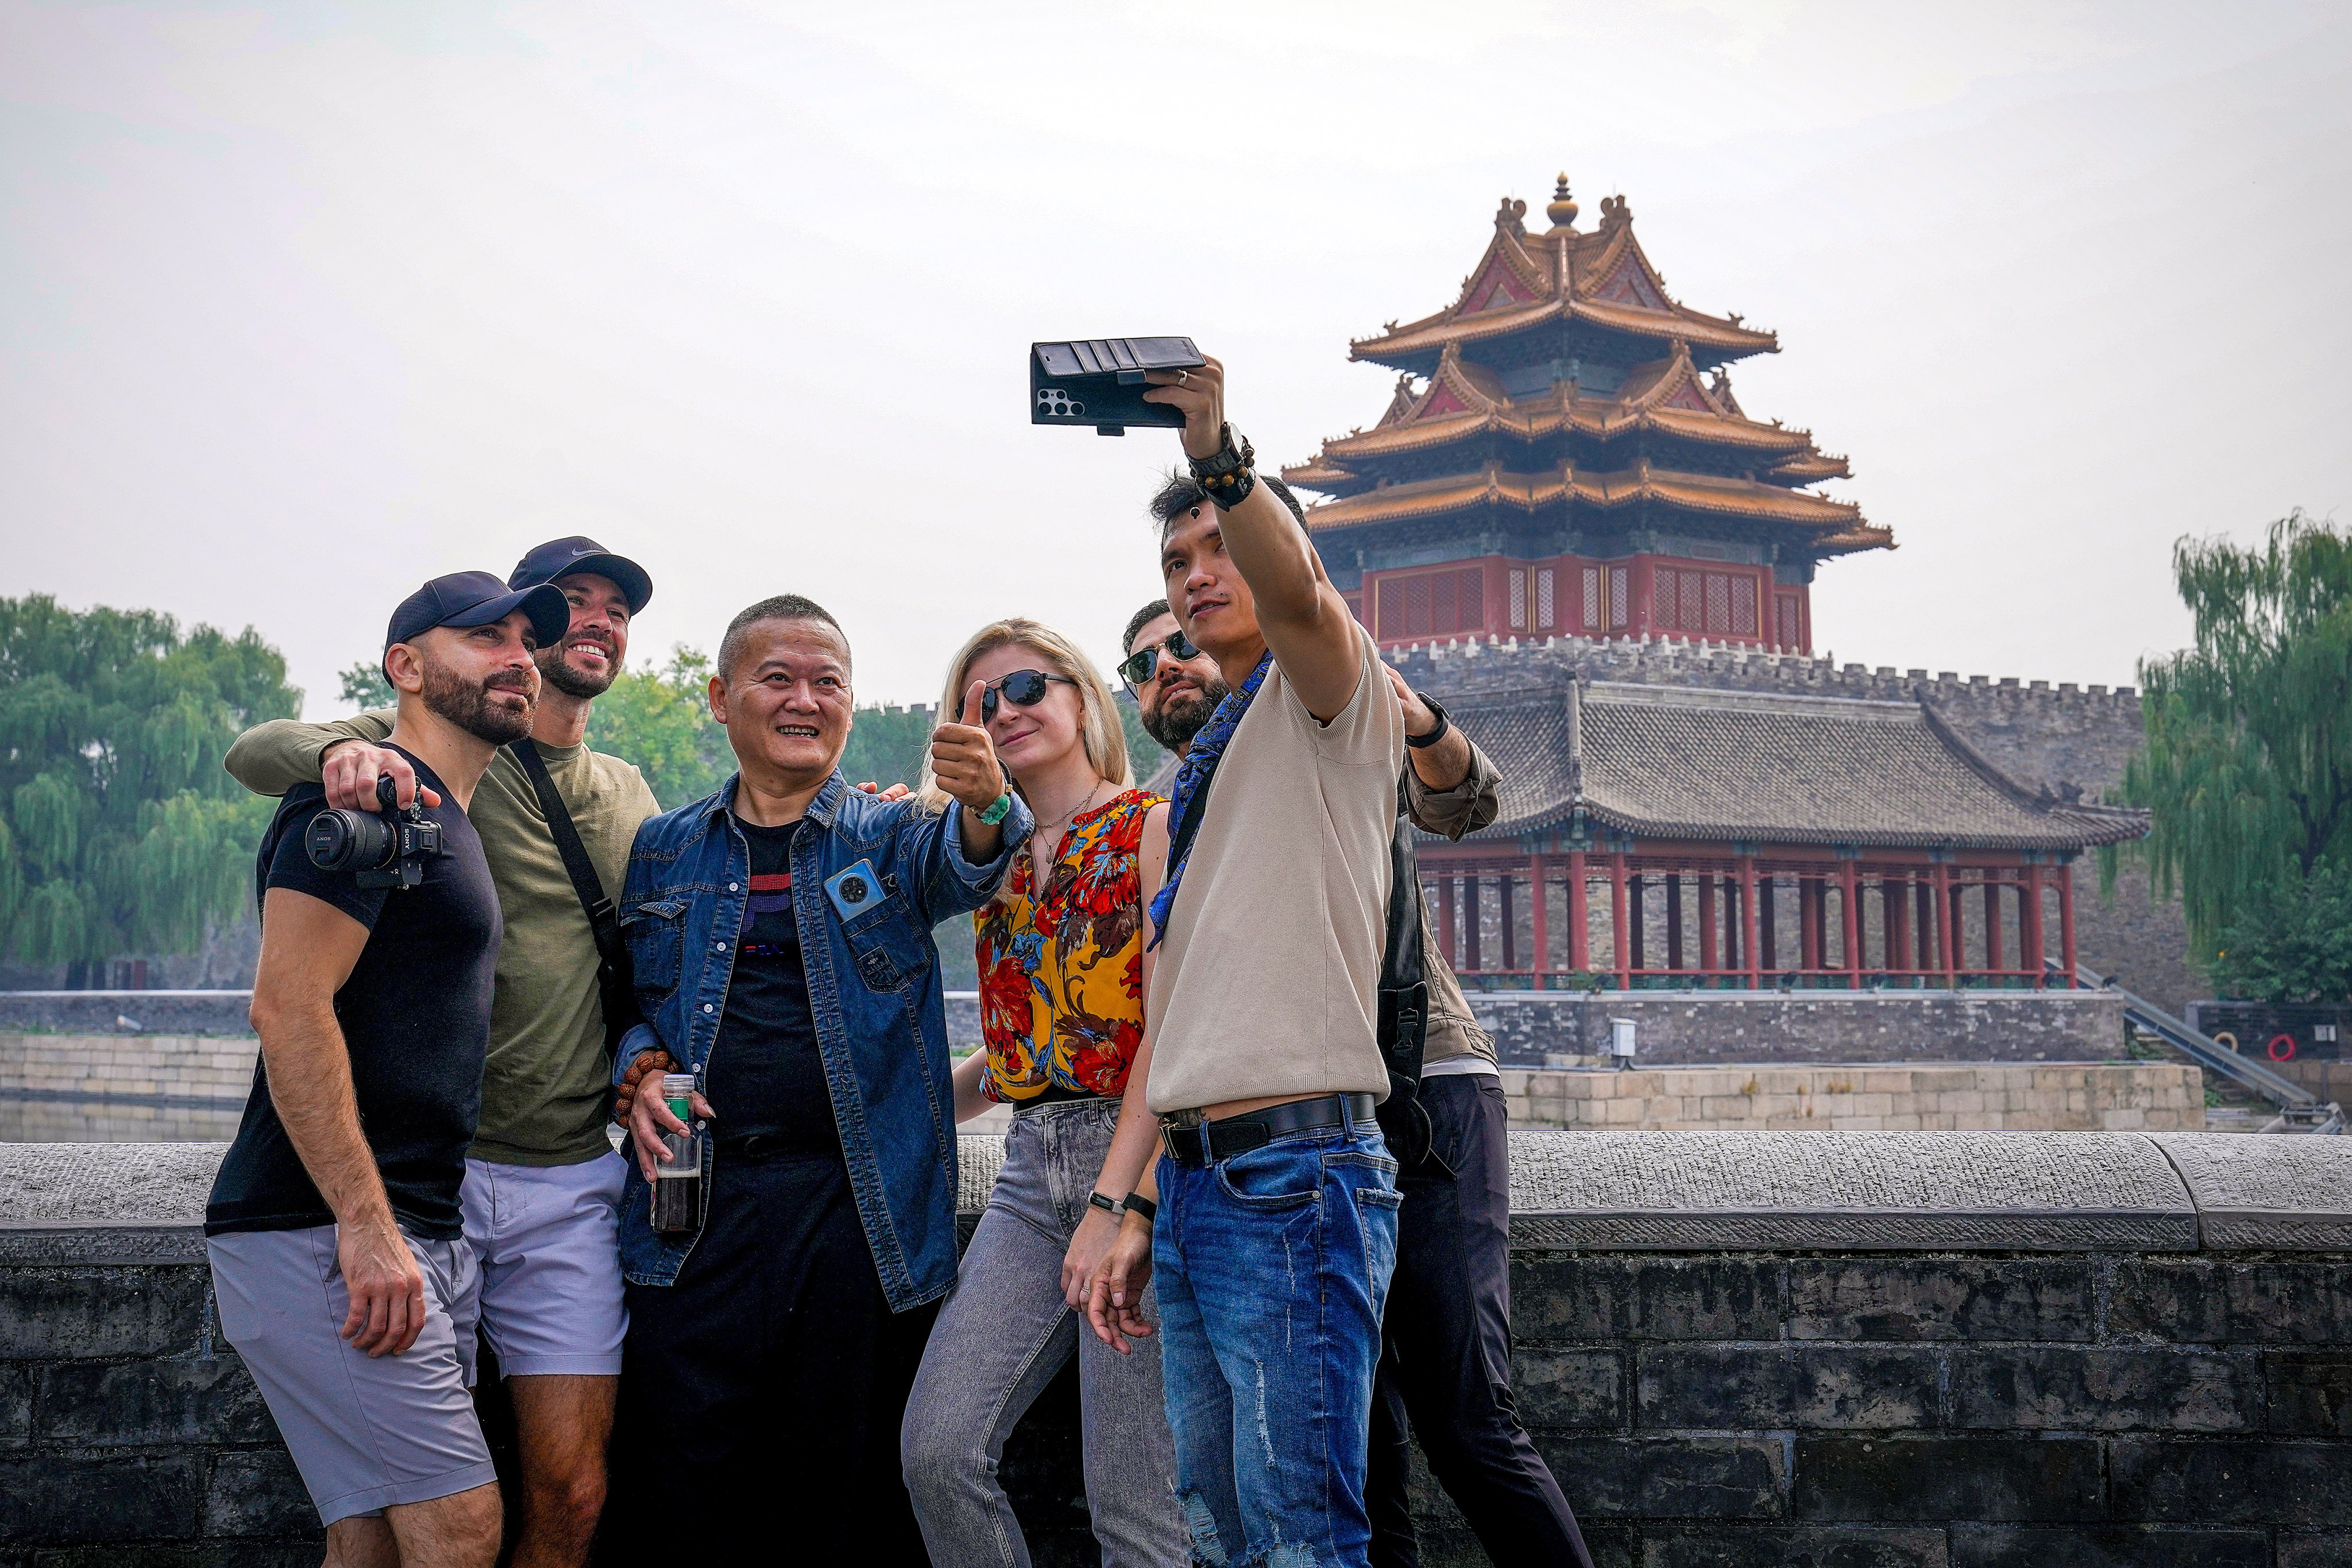 The latest data from China’s National Immigration Administration shows international tourist numbers still in recovery, while foreign residents are at 85 per cent of 2019 levels, before Covid-19. Photo: AP